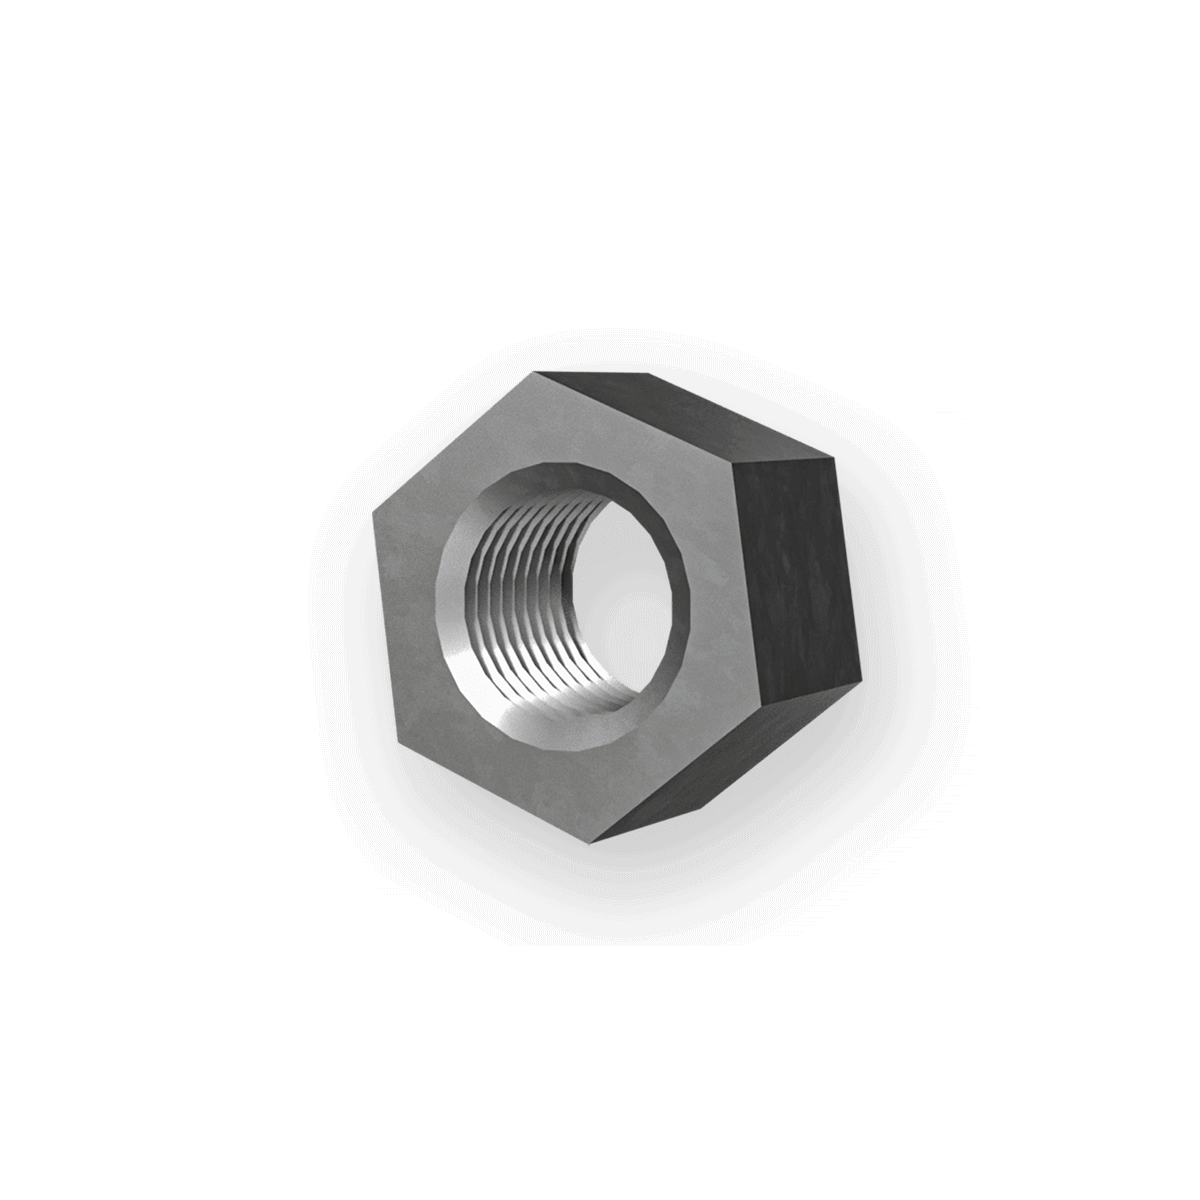 Hex Nut - OR - Flat Washer (sold separately) for Askew Head Bolt (681-75H / 685-75H)